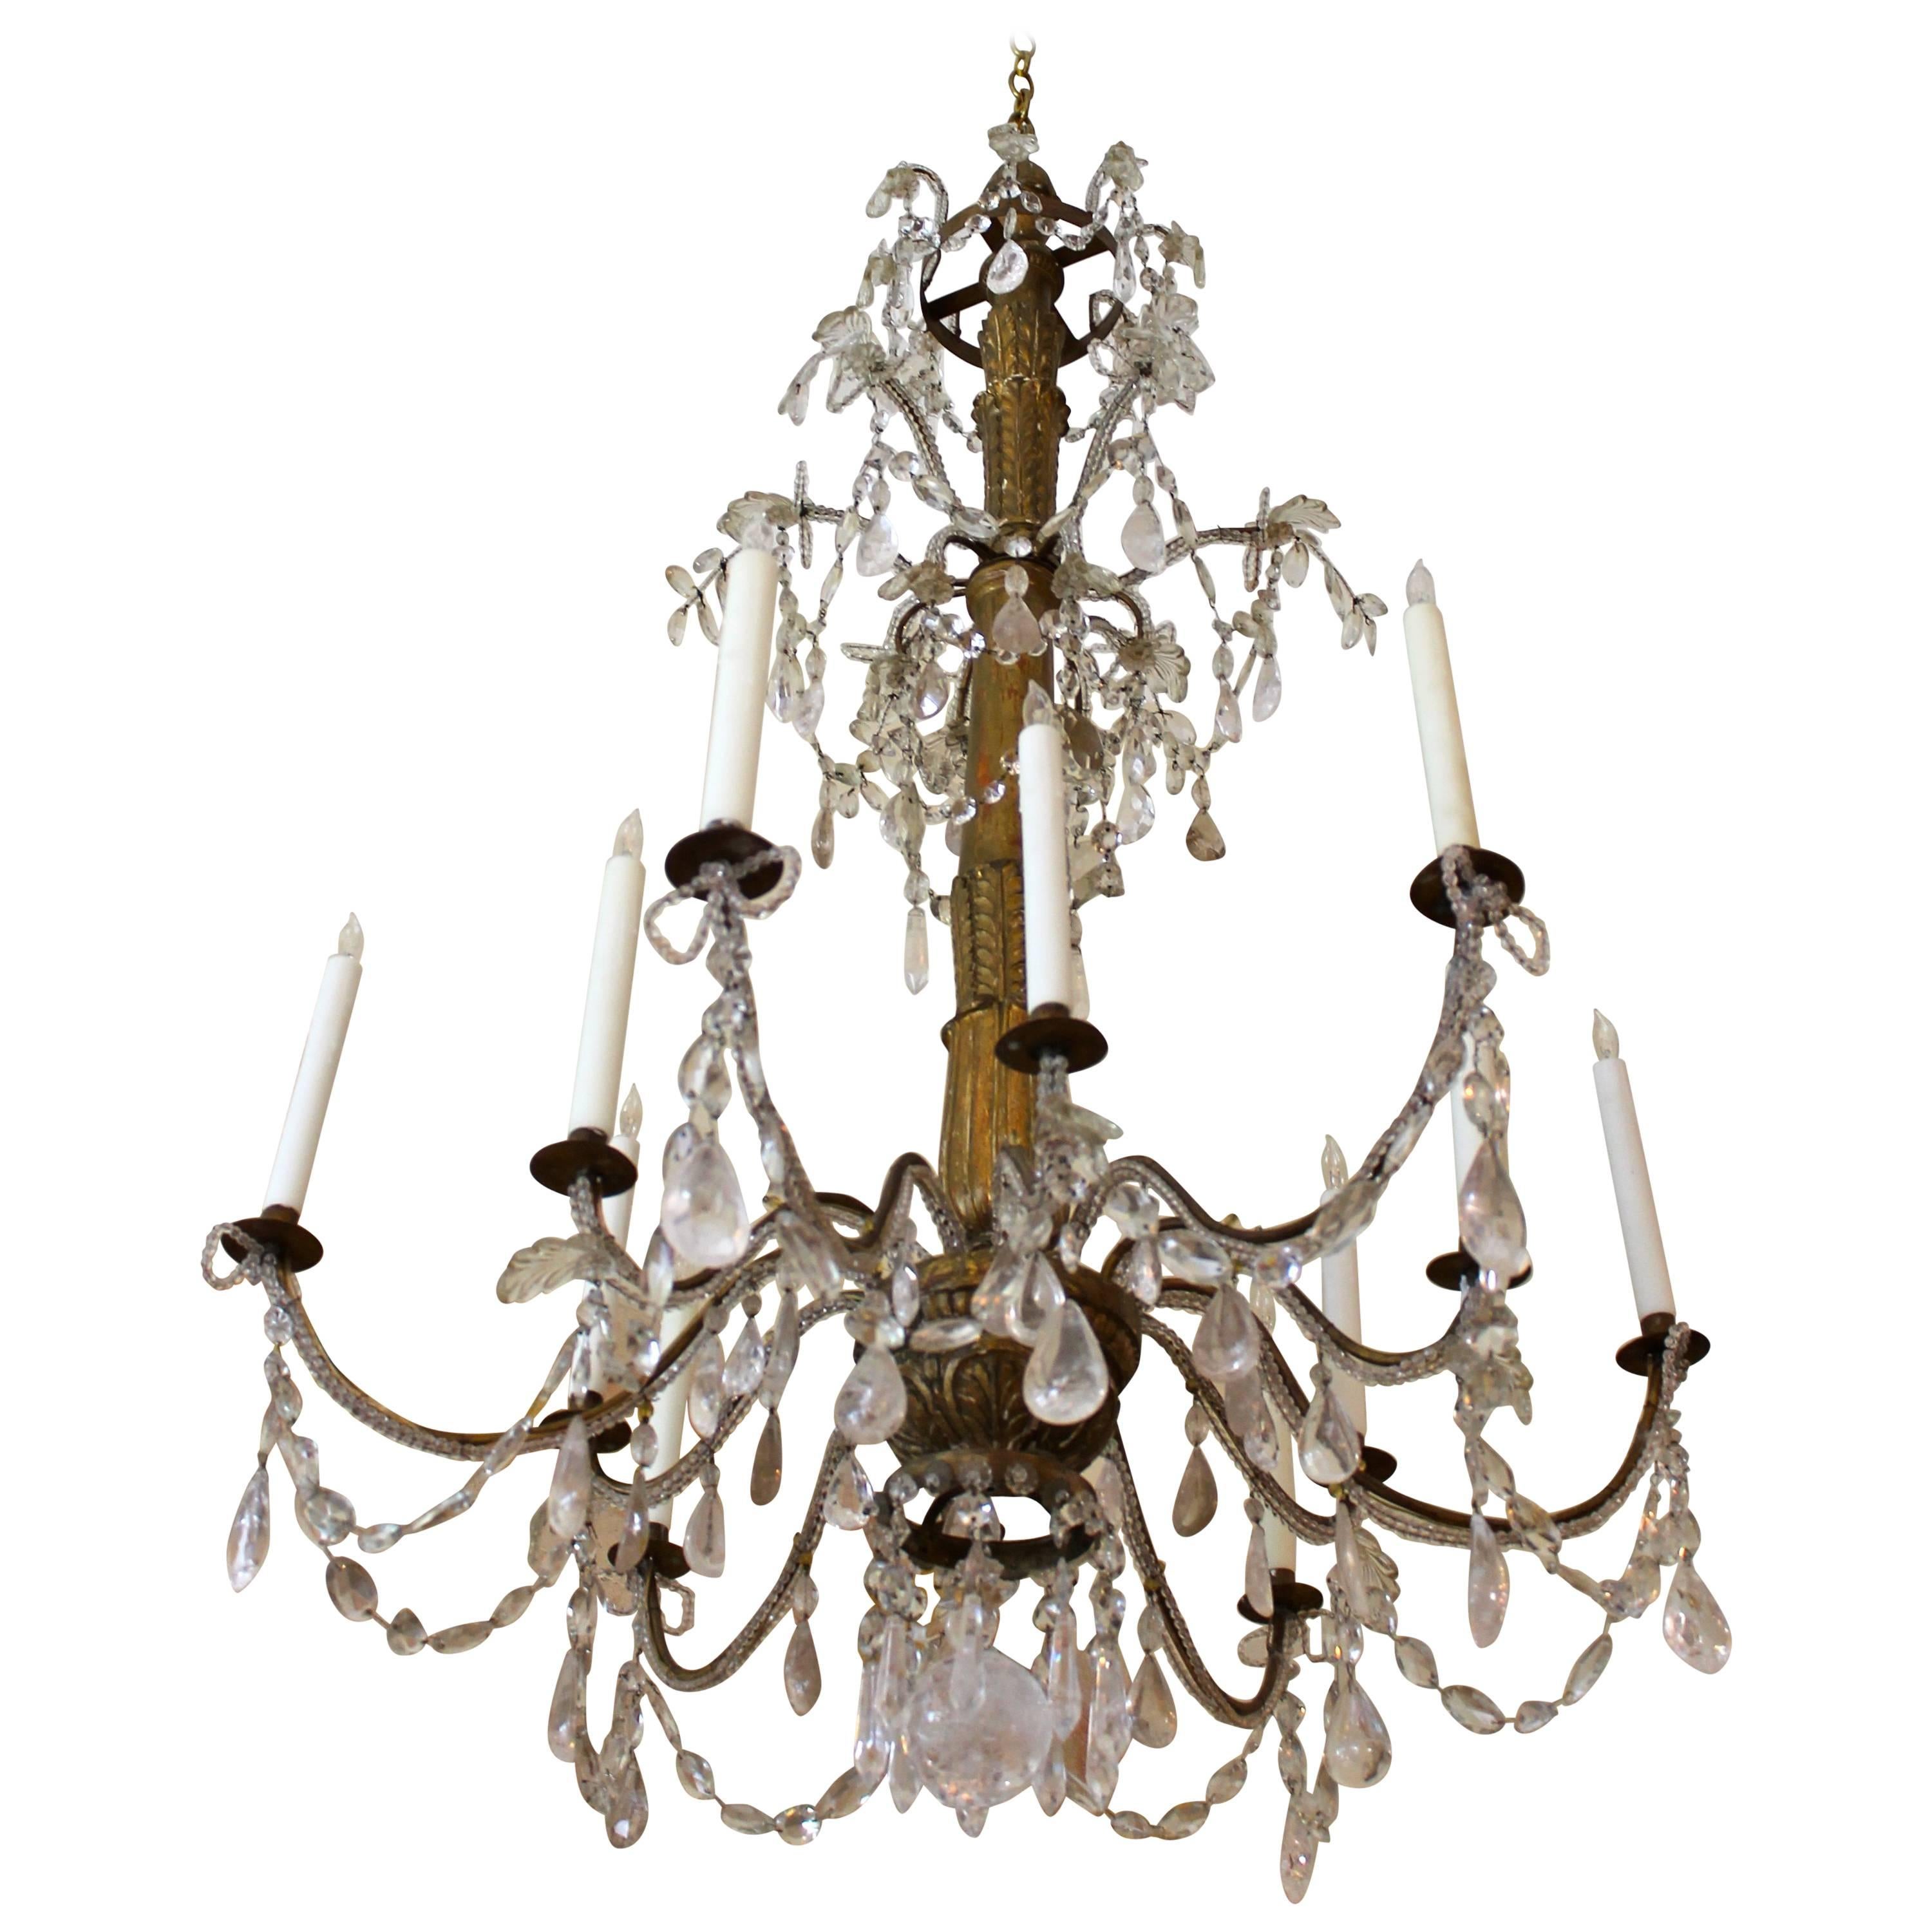 Late 18th-Early 19th Century Colossal Genovese Chandelier For Sale